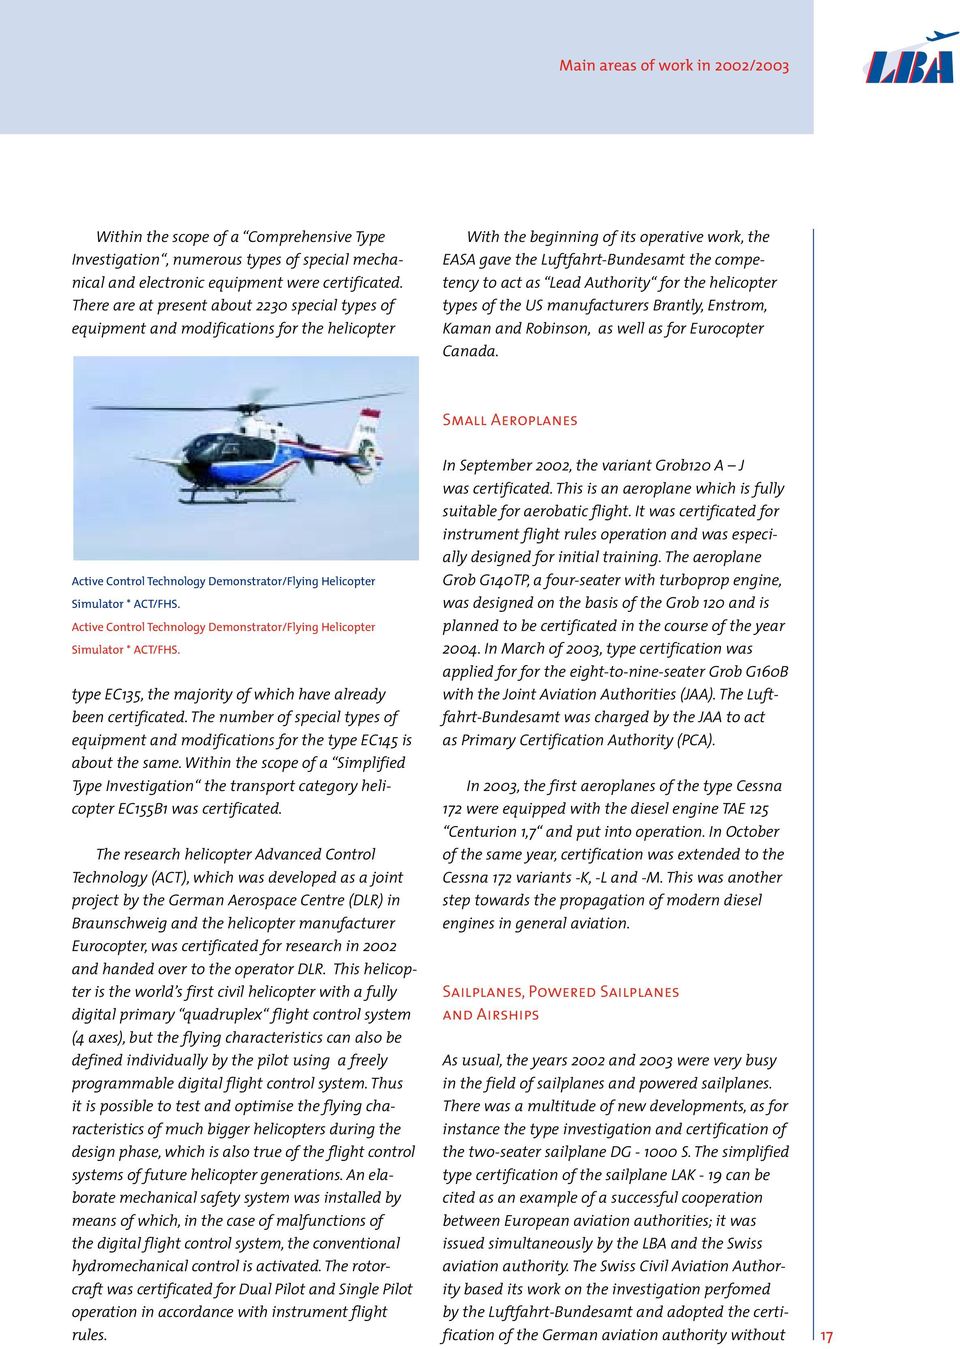 as Lead Authority for the helicopter types of the US manufacturers Brantly, Enstrom, Kaman and Robinson, as well as for Eurocopter Canada.